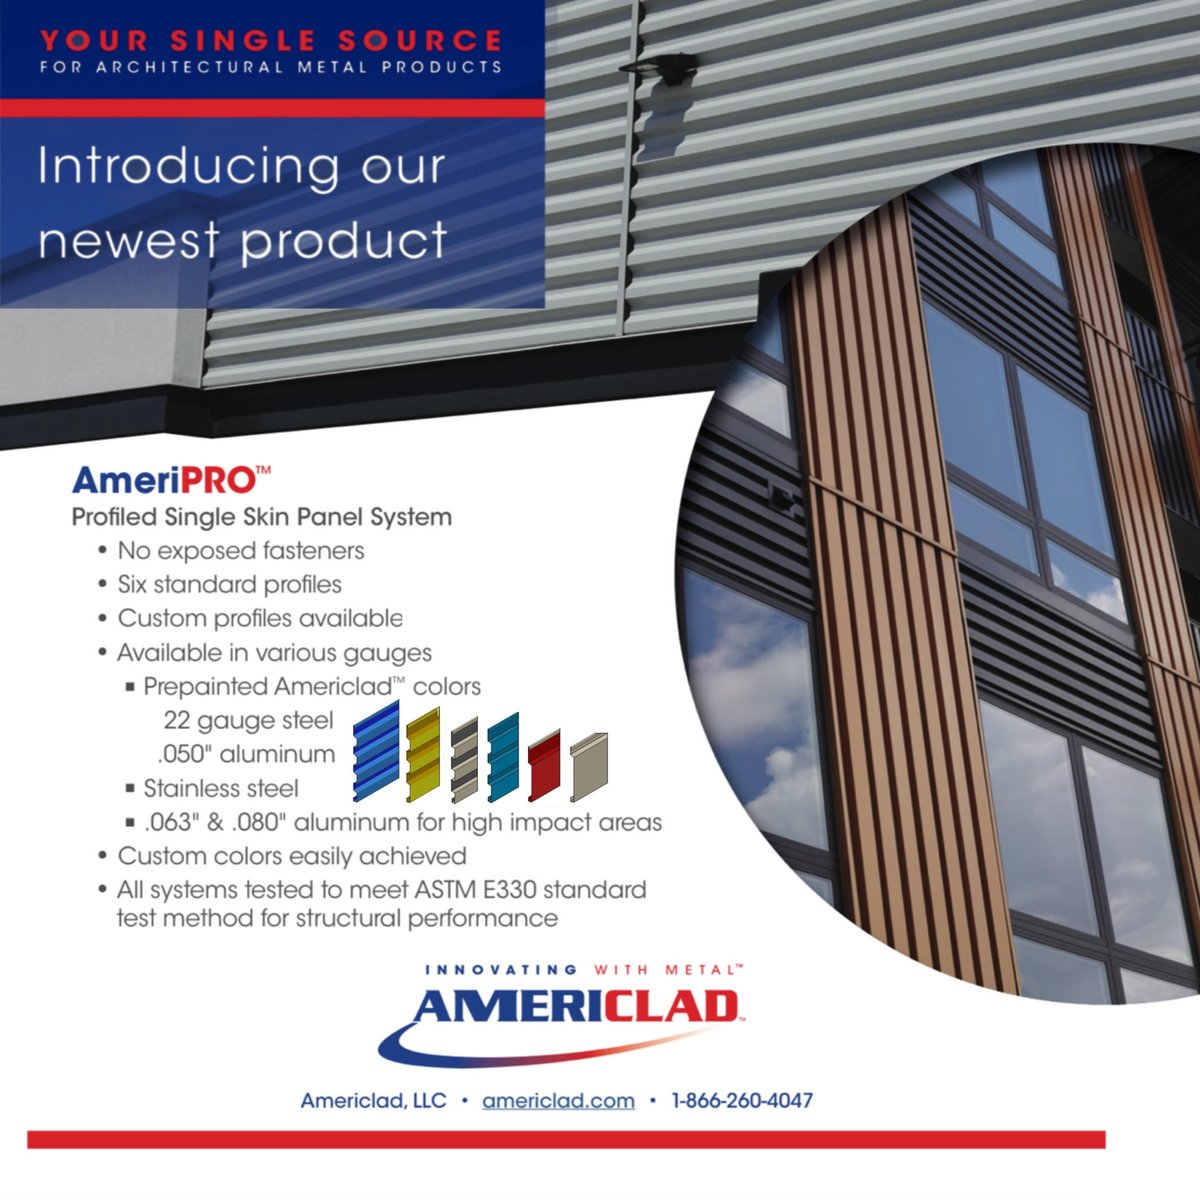 NEW PRODUCT ALERT: @americlad recently released their new single skin panel system : AmeriPRO. For more information, please contact your local @PGPUSA representative or visit @americlad online at : lnkd.in/g7pWX4hN #glazing #texasglazing #glazier #texasconstruction